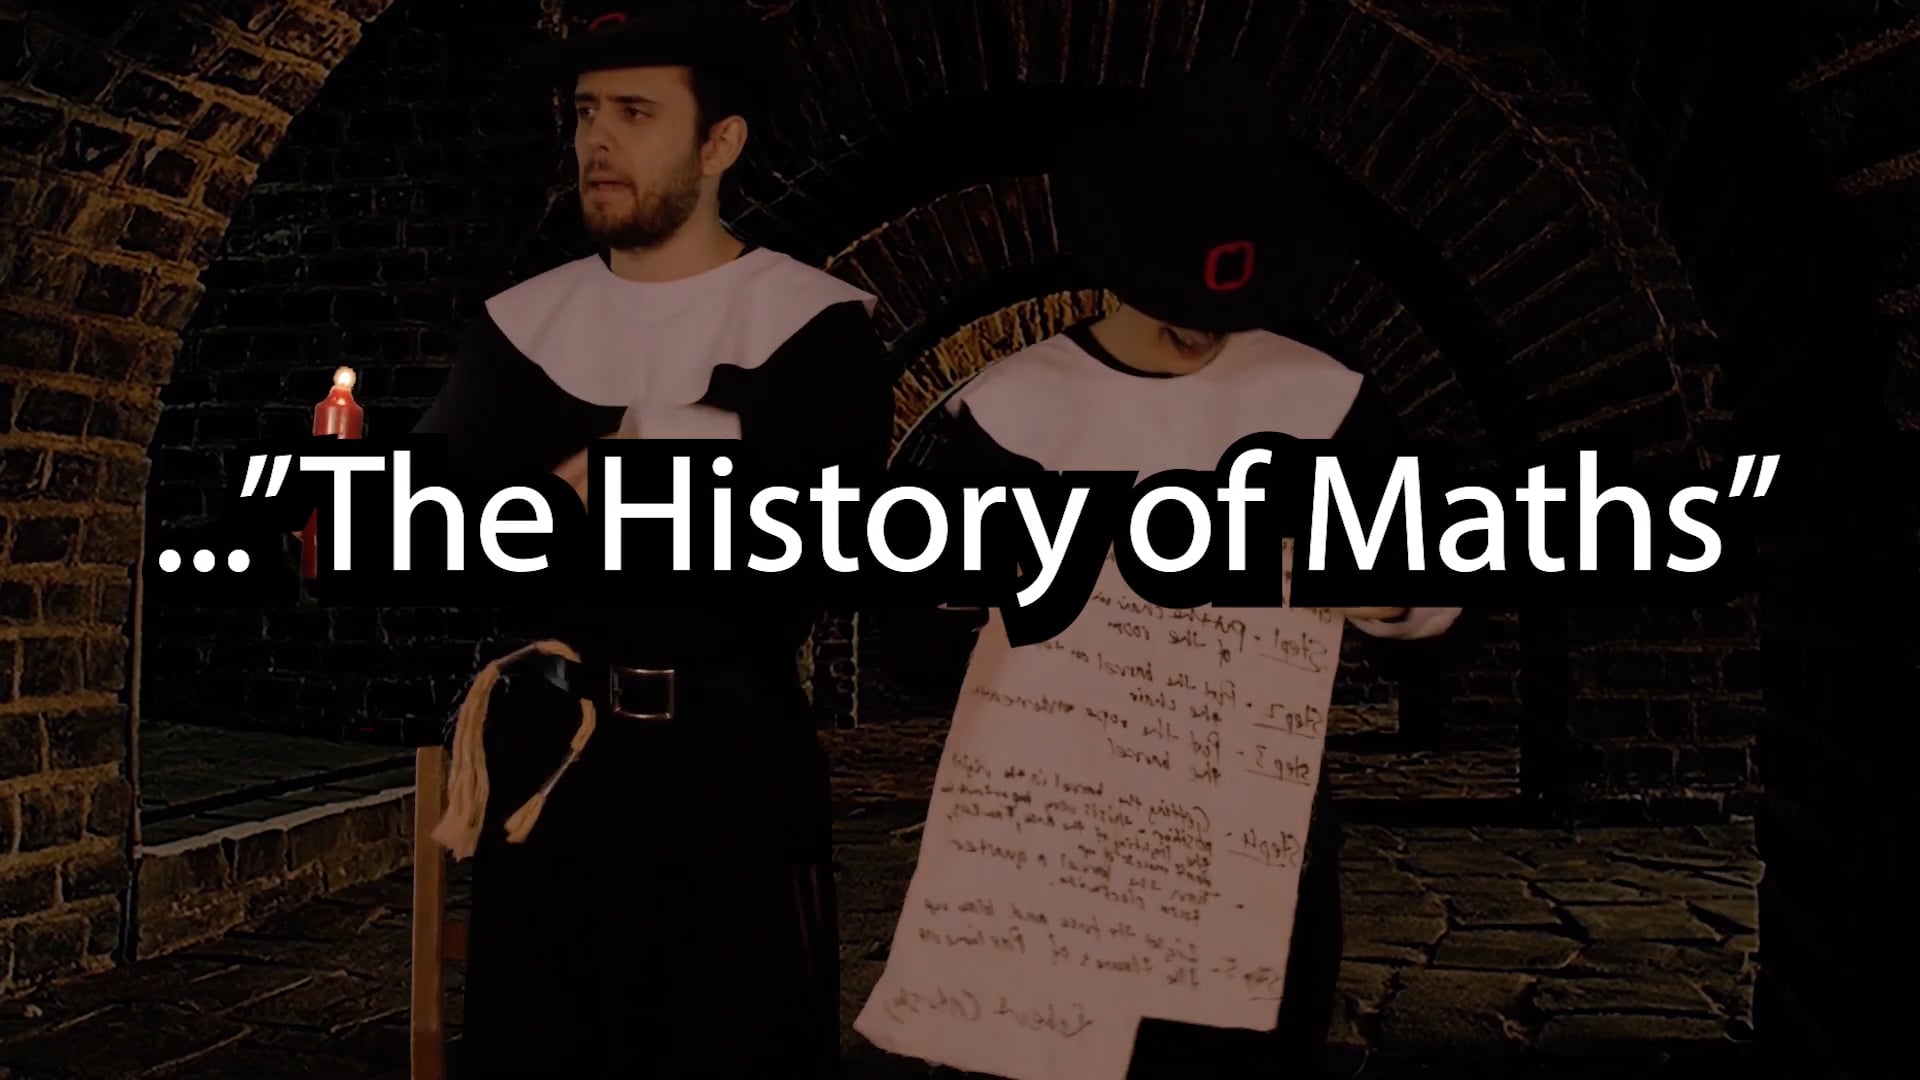 The History of Maths Trailer